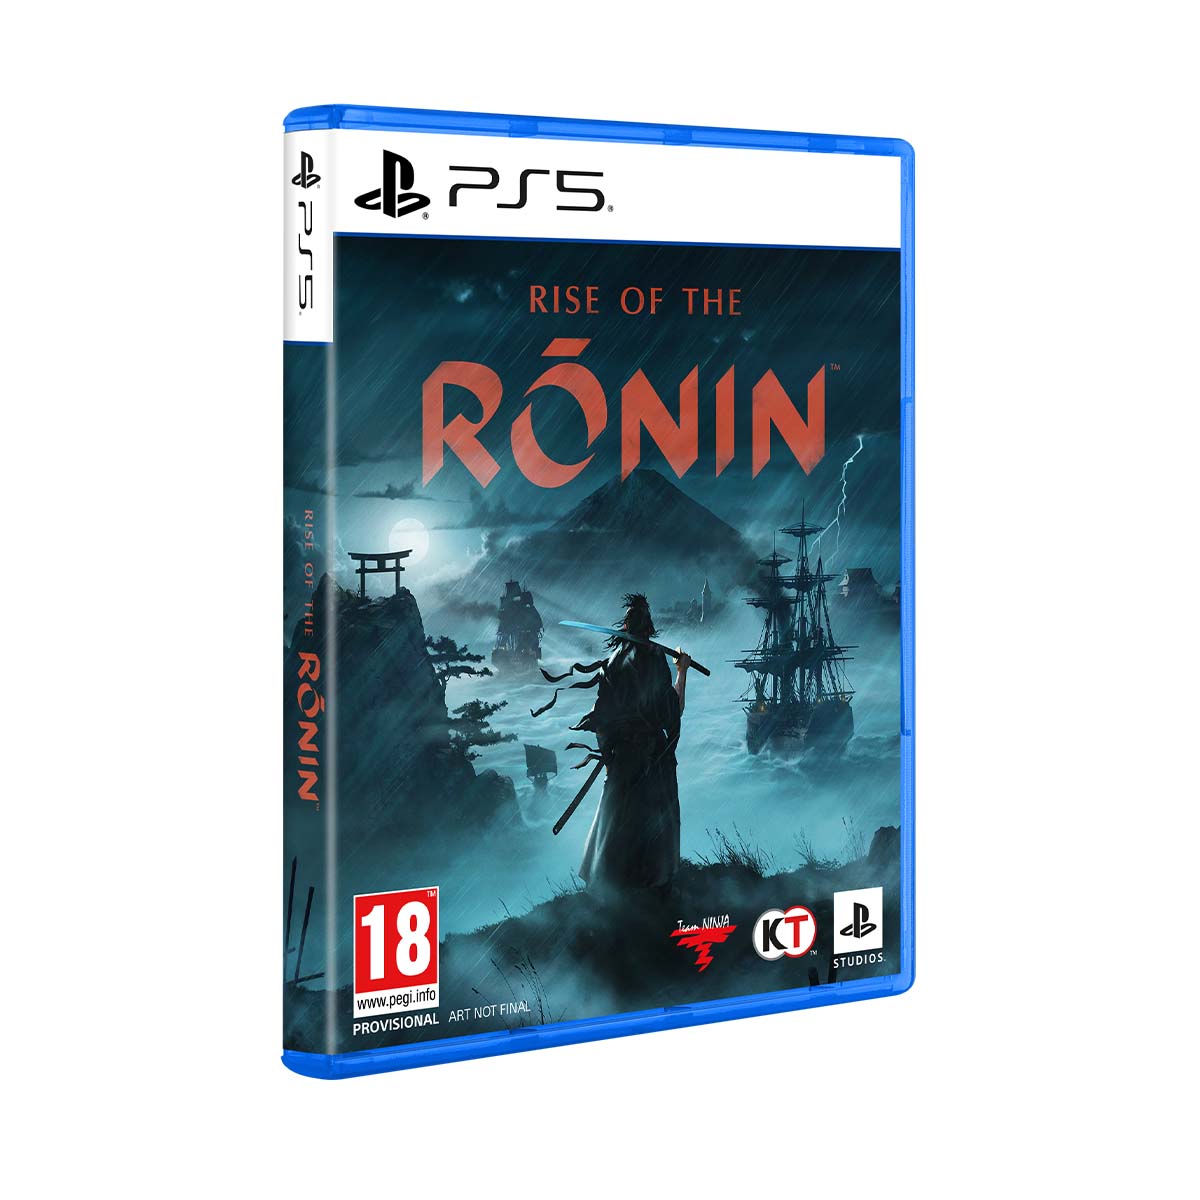 Buy PlayStation 5 Console Disc Slim + Rise of the Ronin PS5 